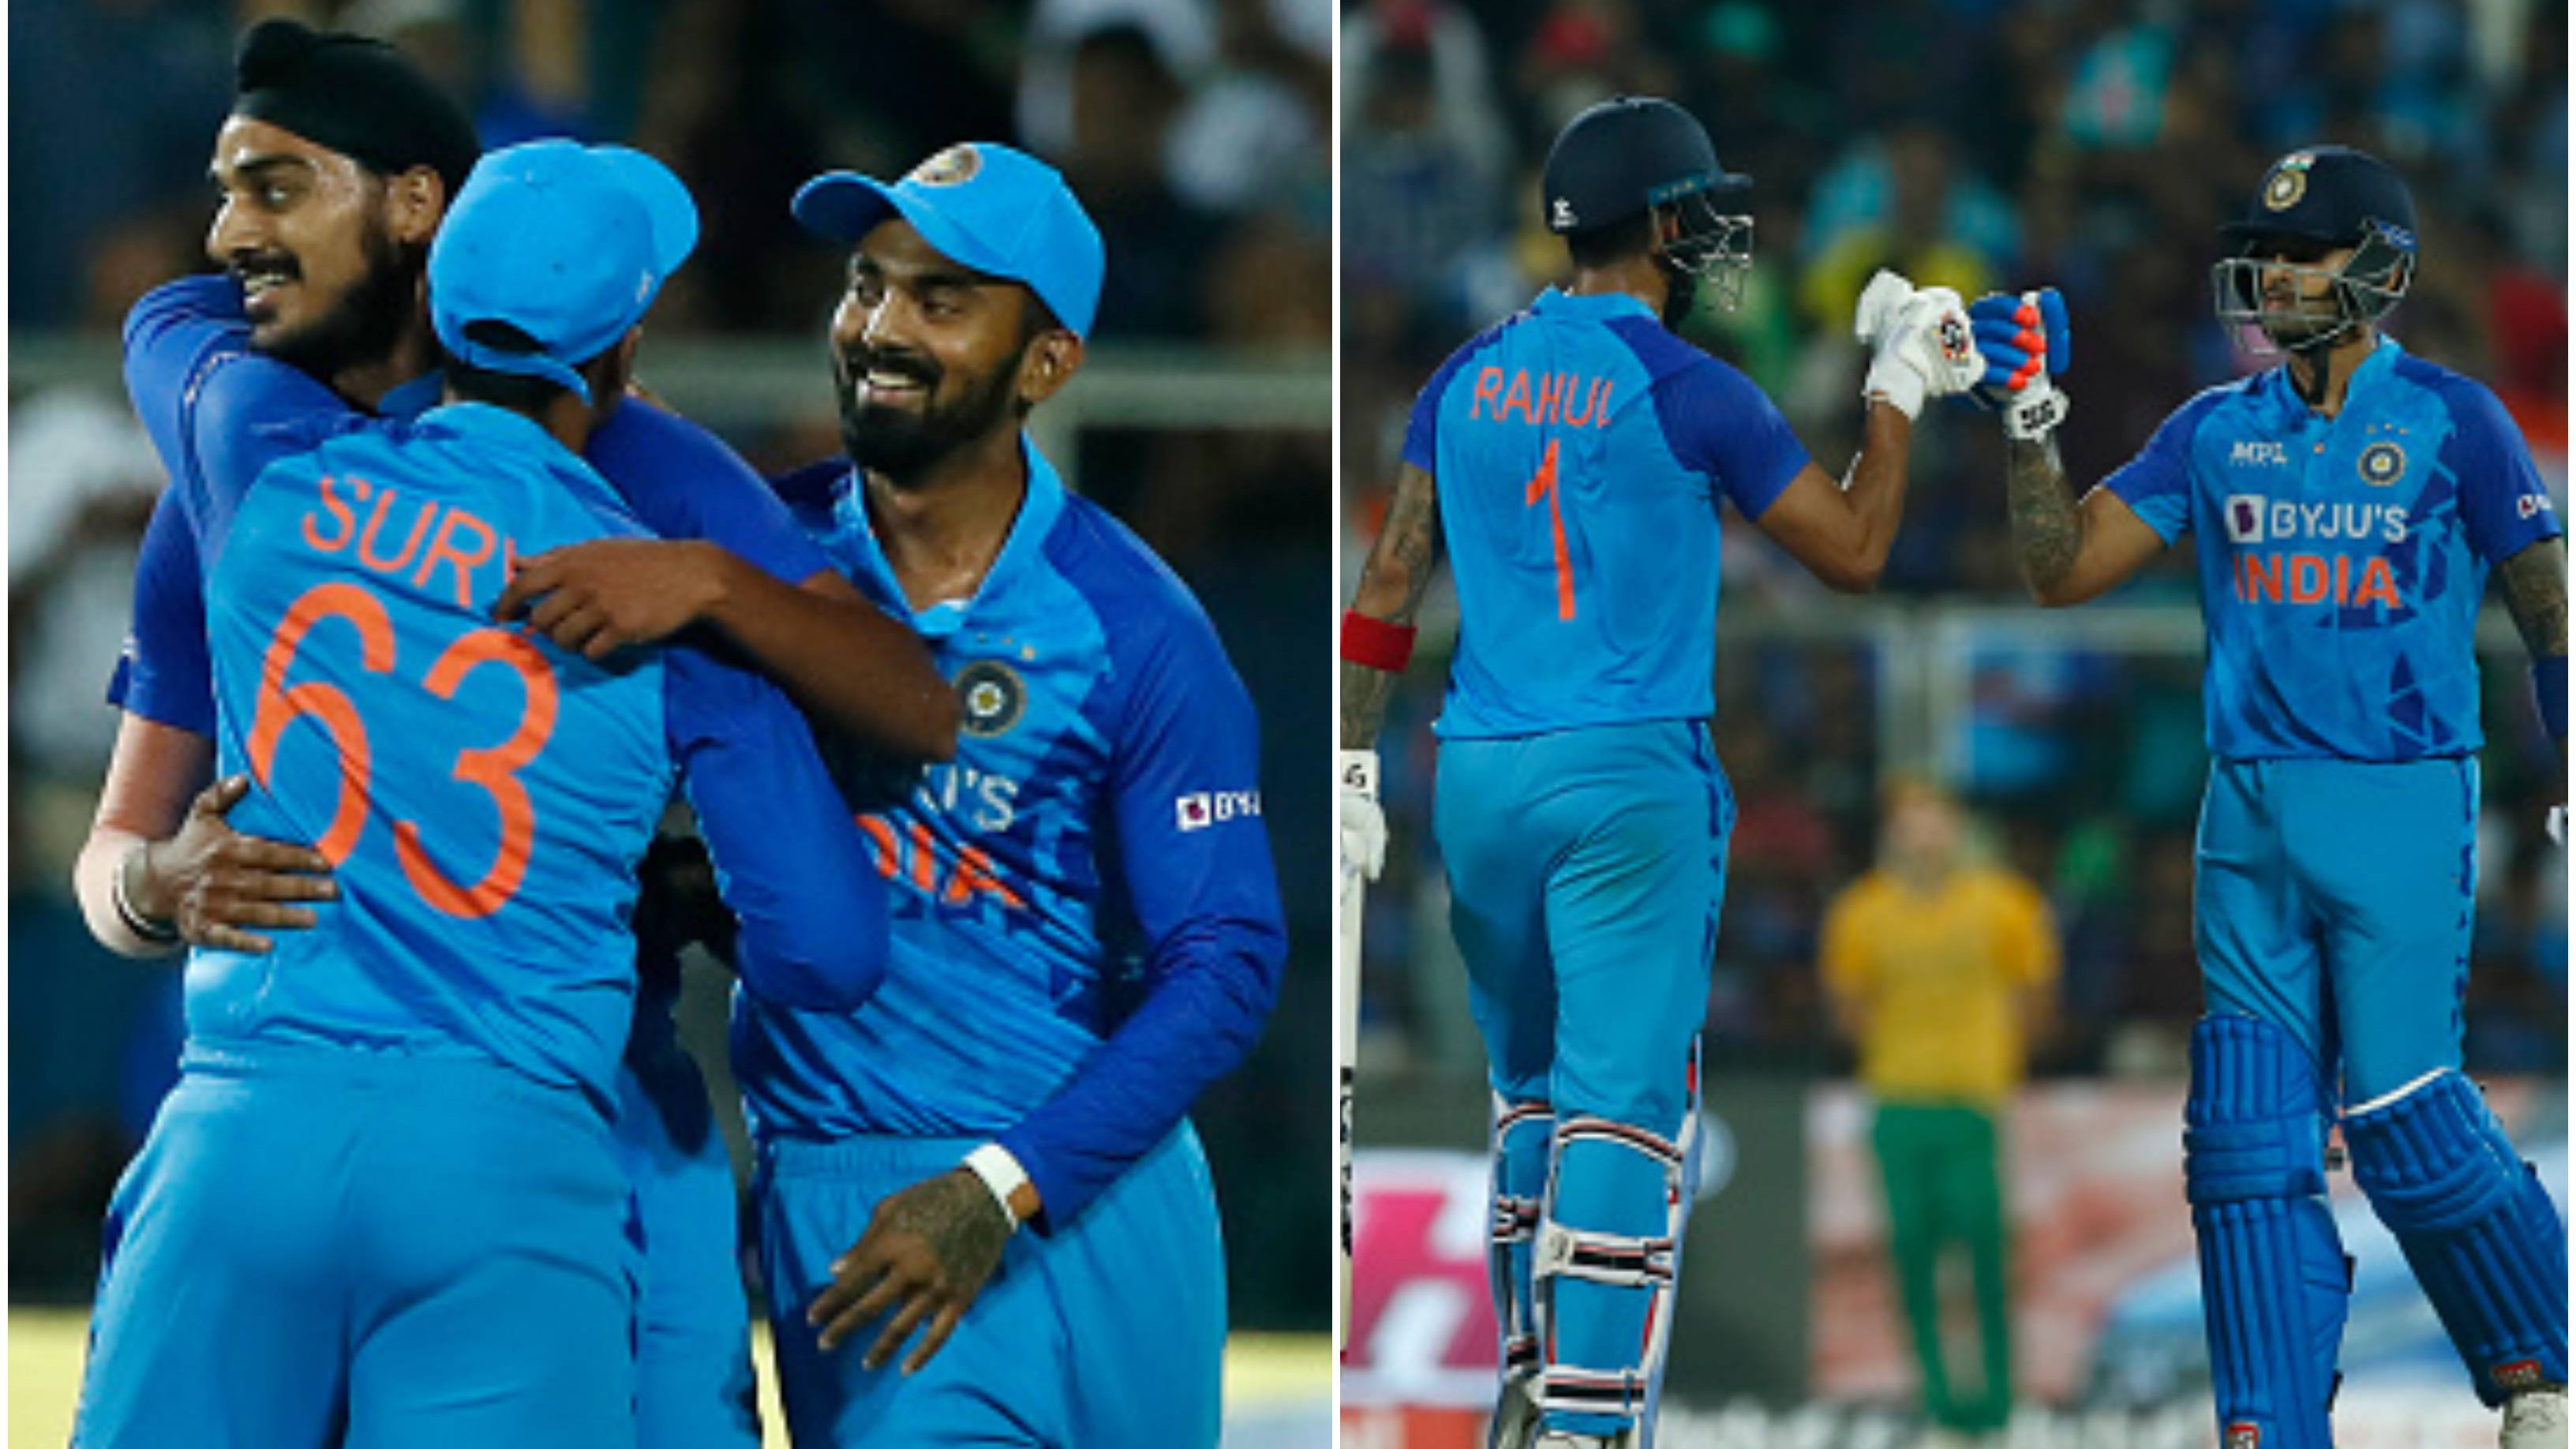 IND v SA 2022: Pacers, Suryakumar Yadav star in India’s 8-wicket win over South Africa in first T20I